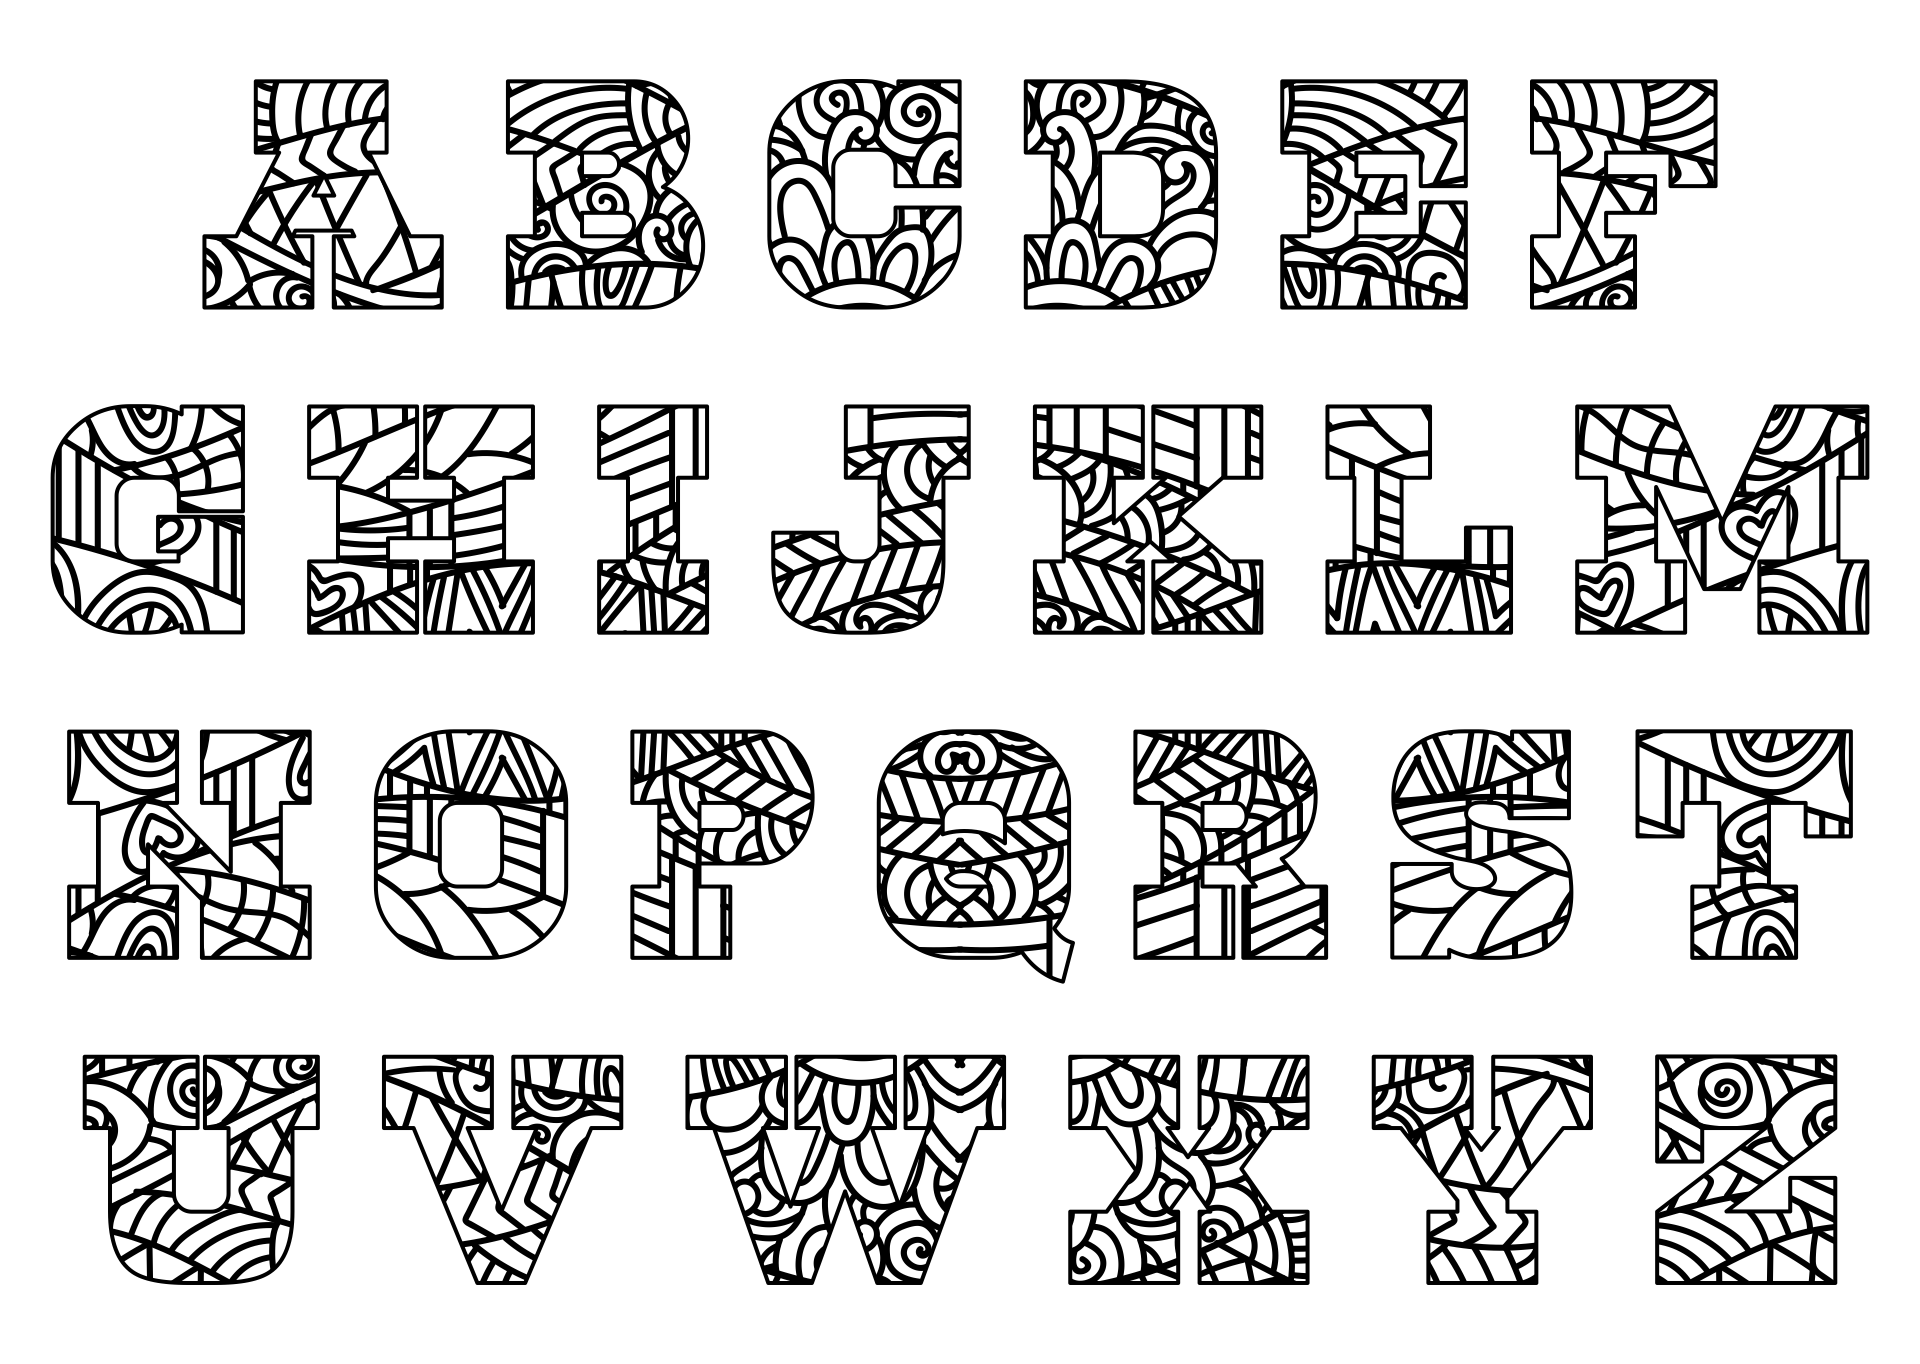 Alphabet Printable Images Gallery Category Page 11 Printablee